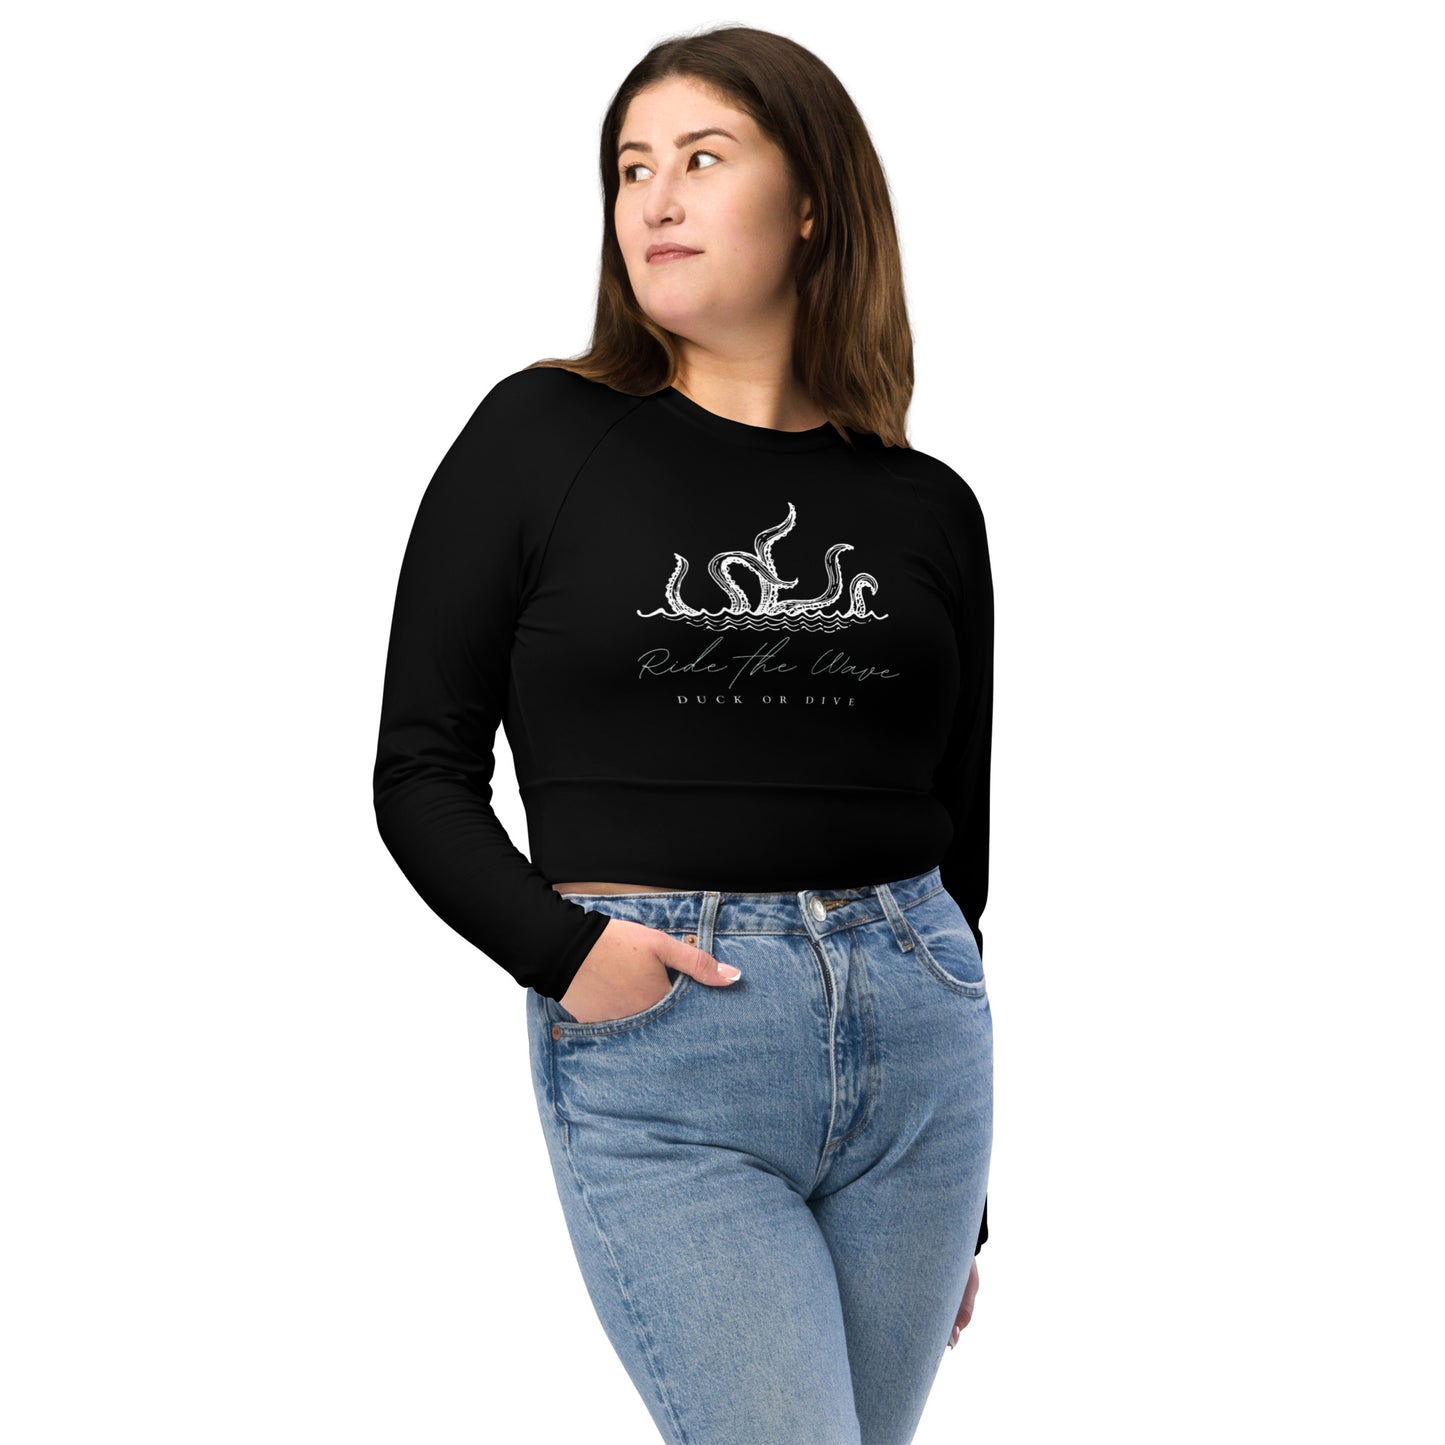 "Ride the Wave" Recycled Long-Sleeve Crop Top